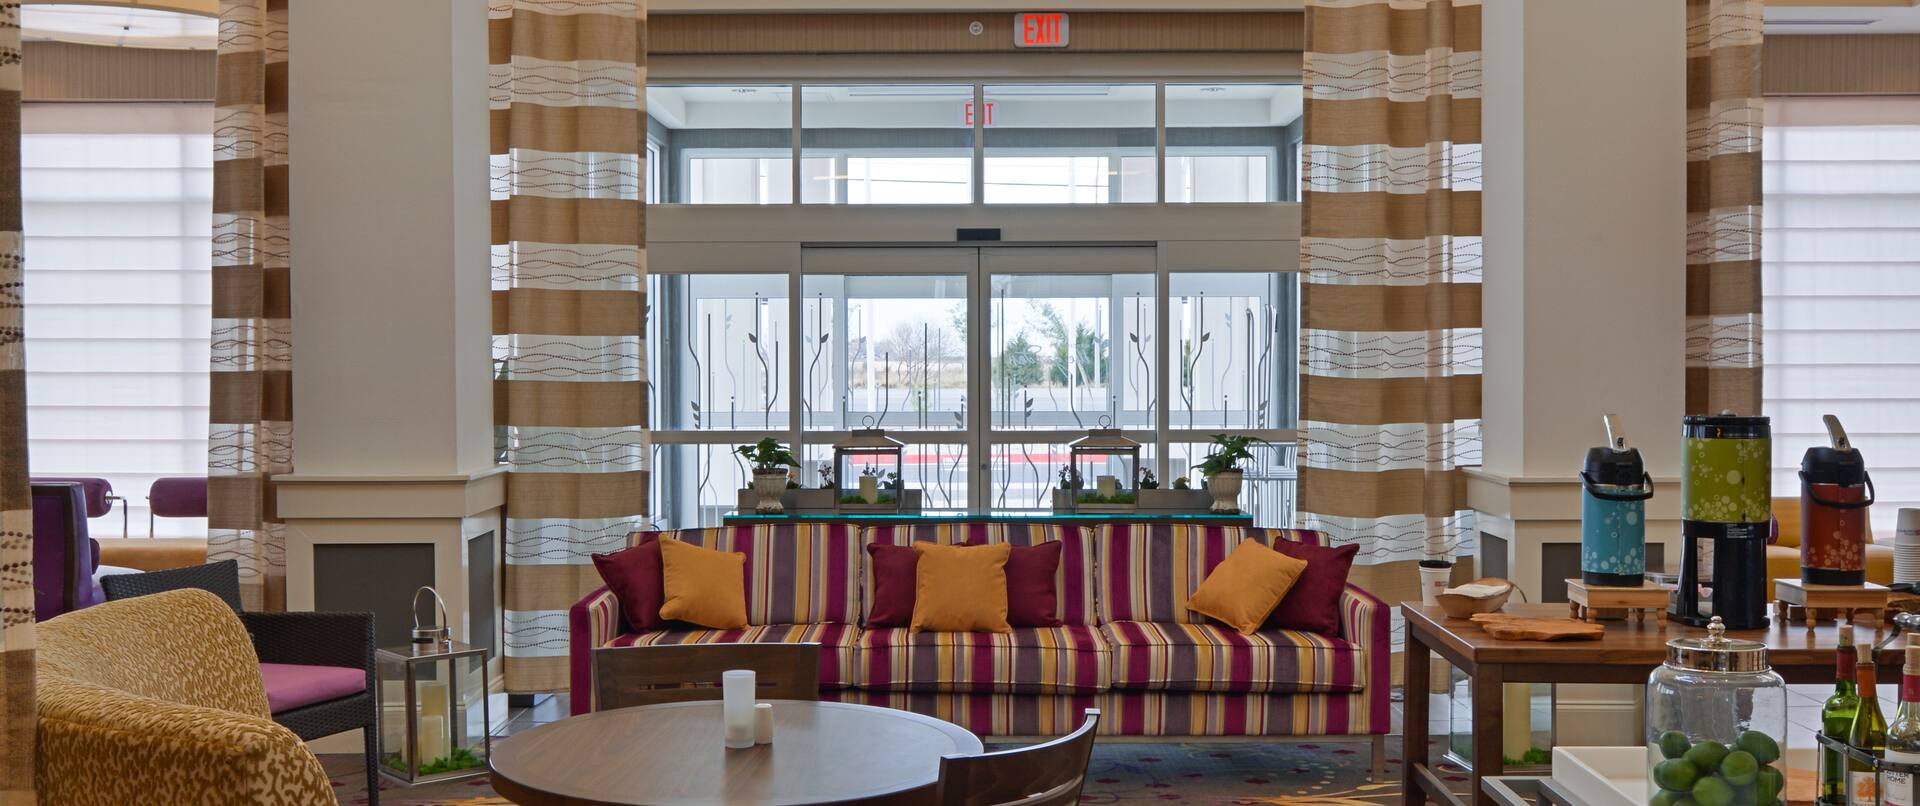 Lobby Sitting Area With Sofa, Table, Chairs, and Beverage Station